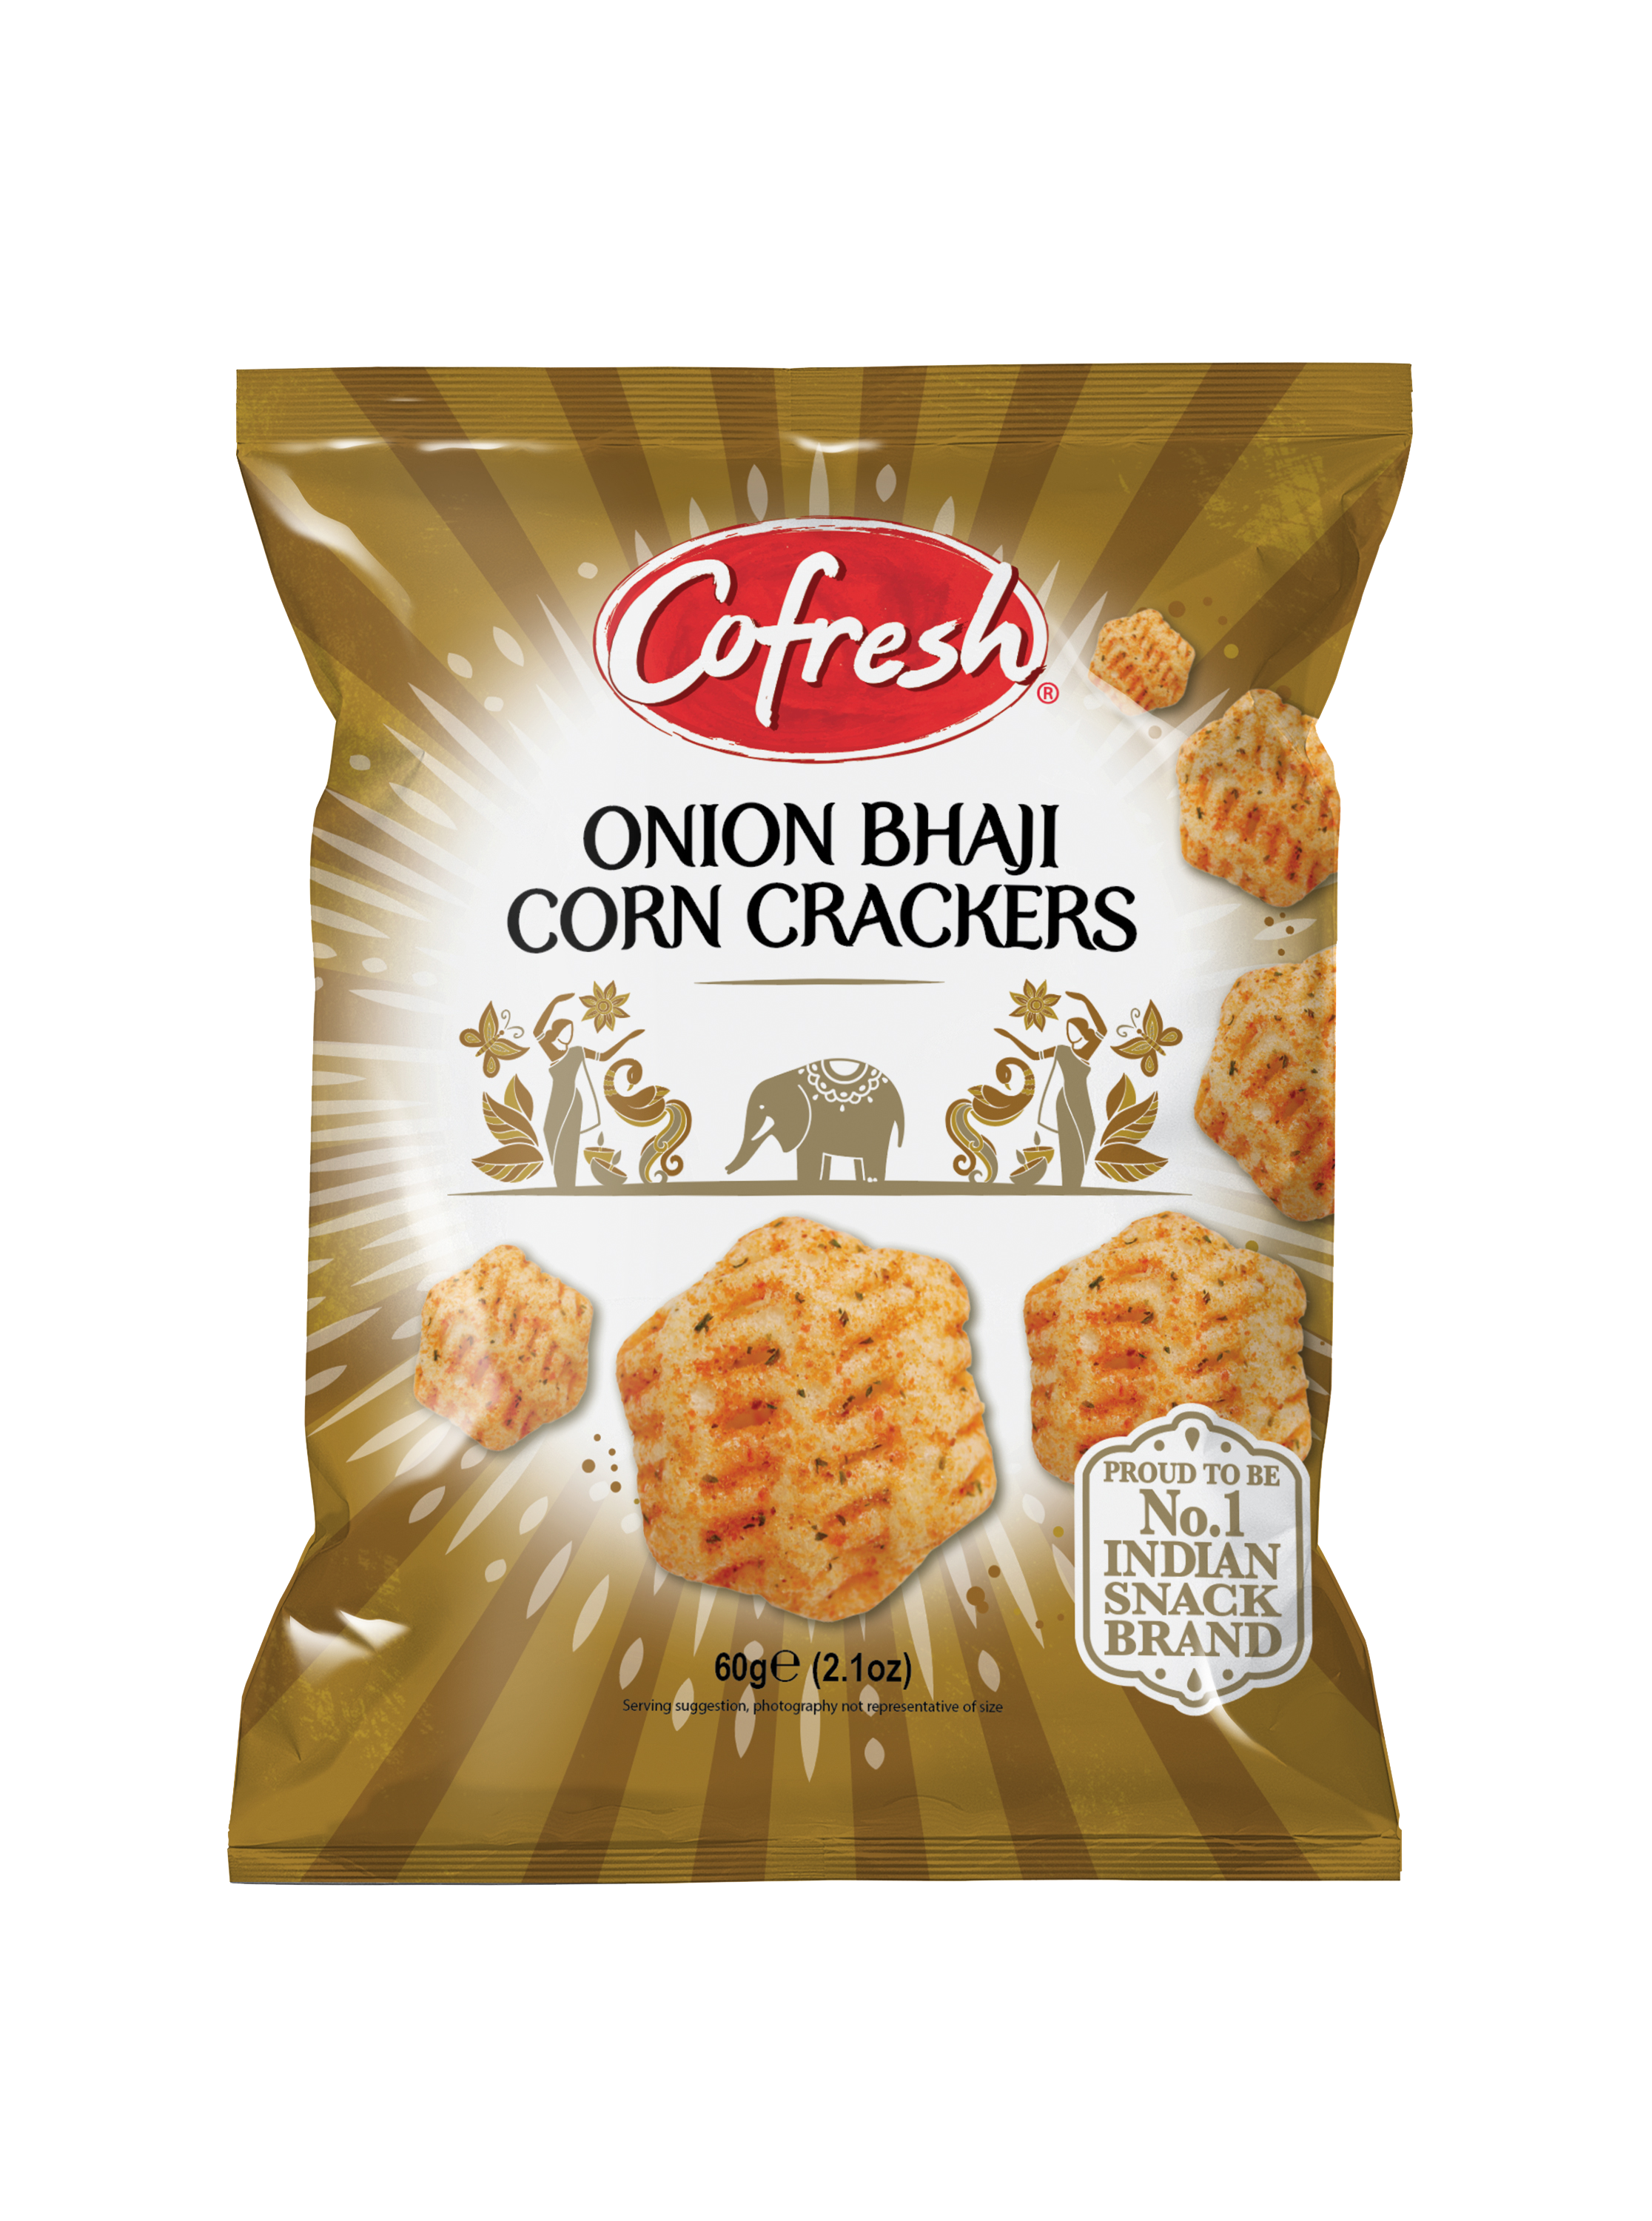 New cracker snacks (and grills!) from Cofresh